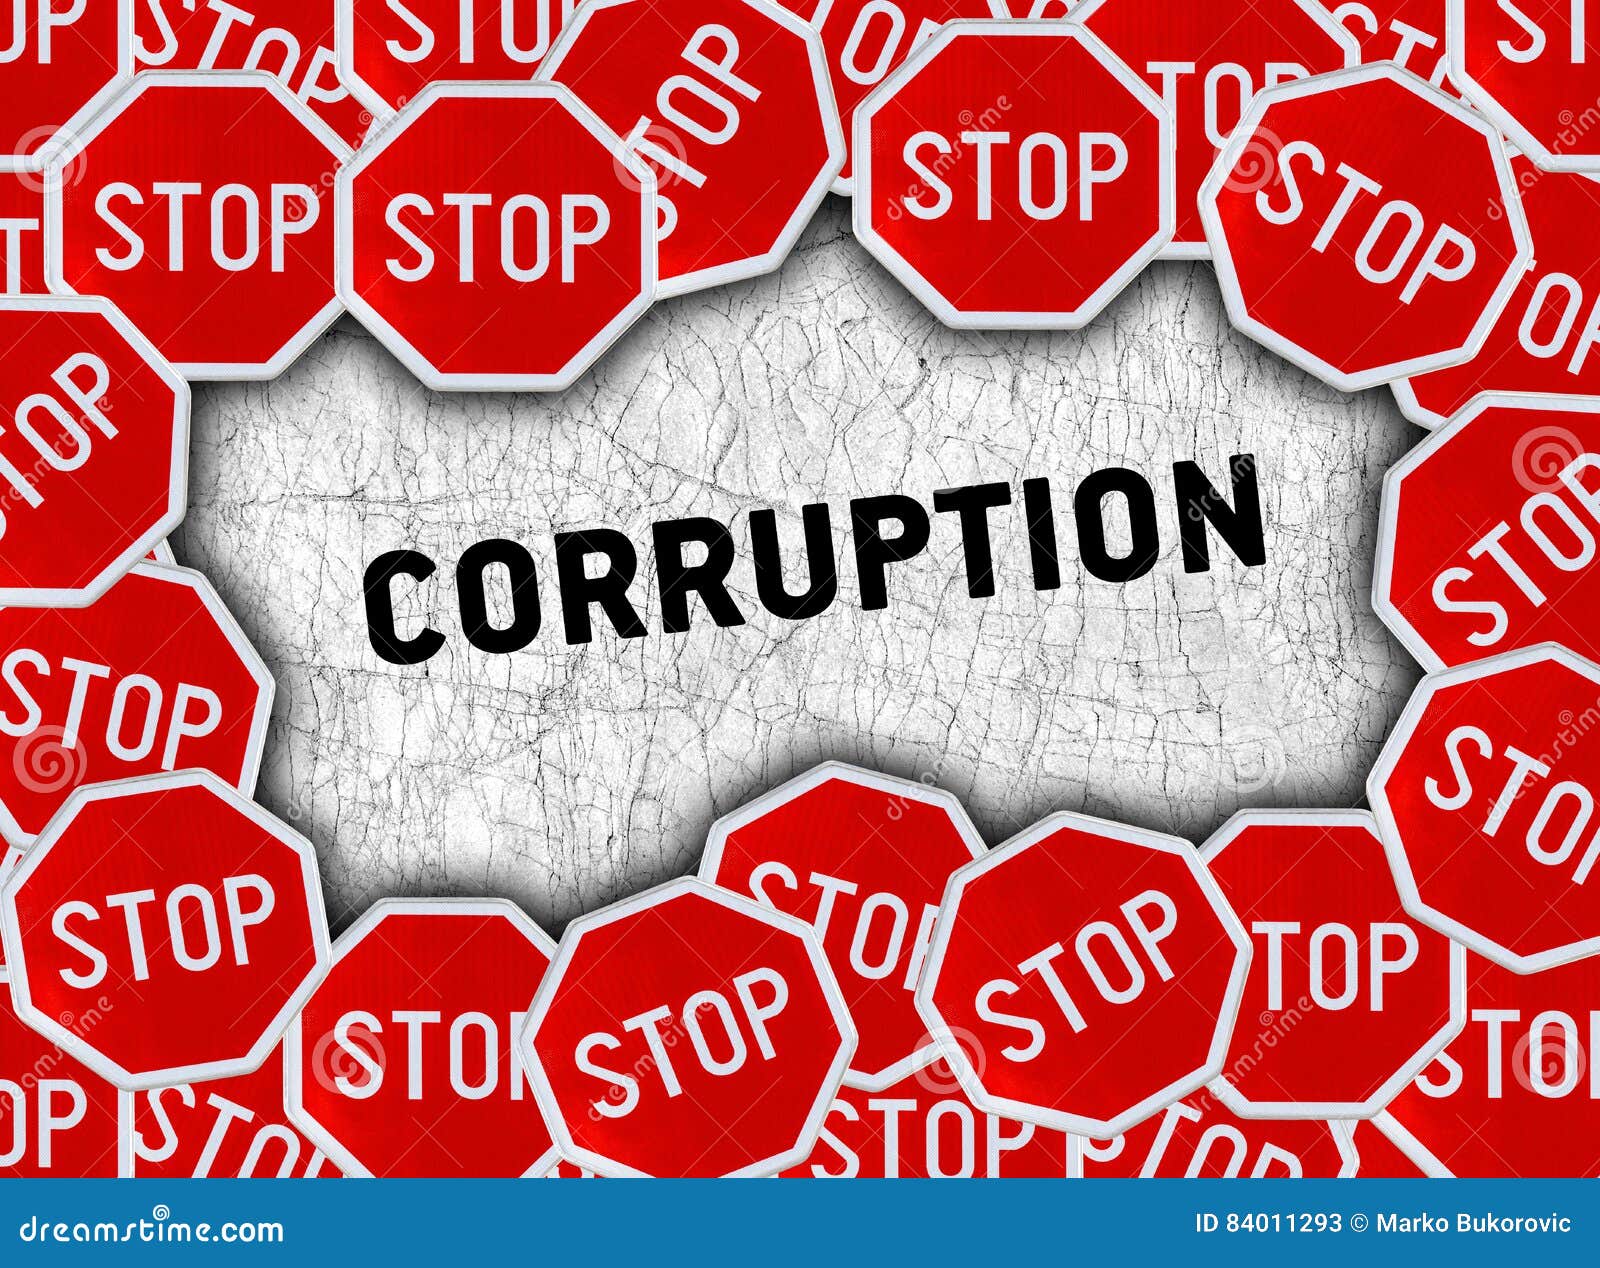 How to stop corruption: 5 key ingredients